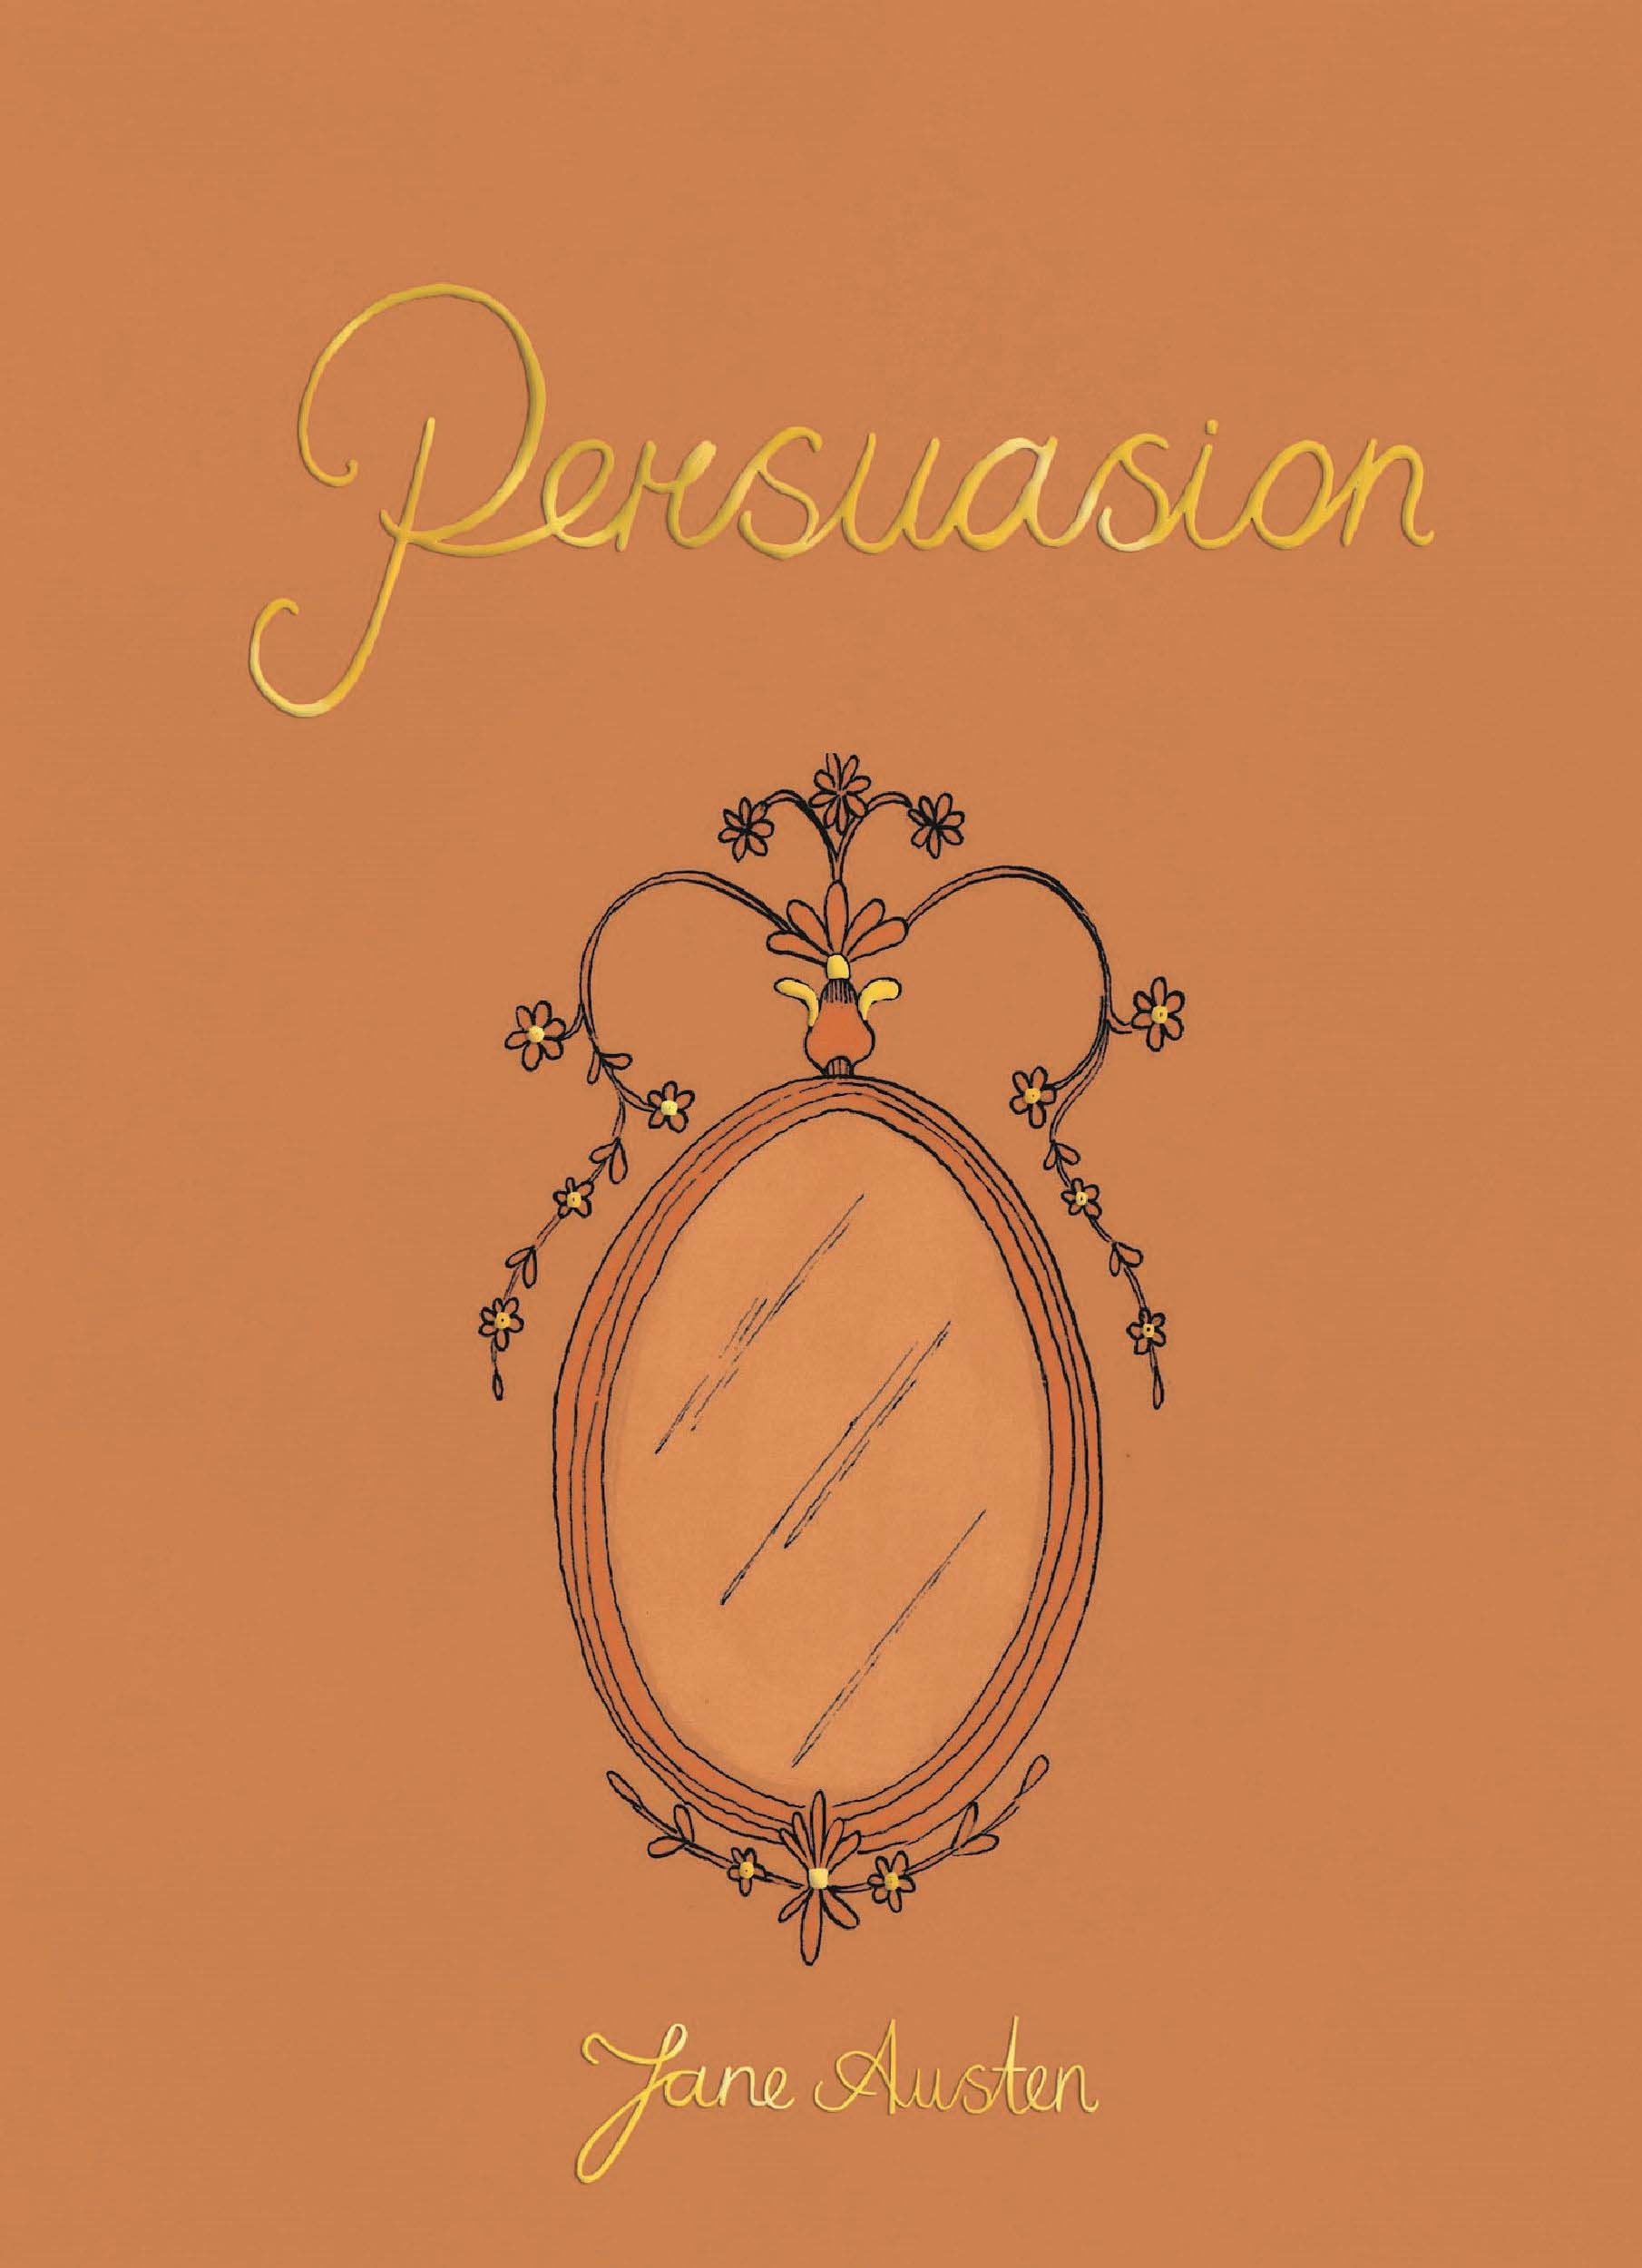 Persuasion (Collector's Edition)